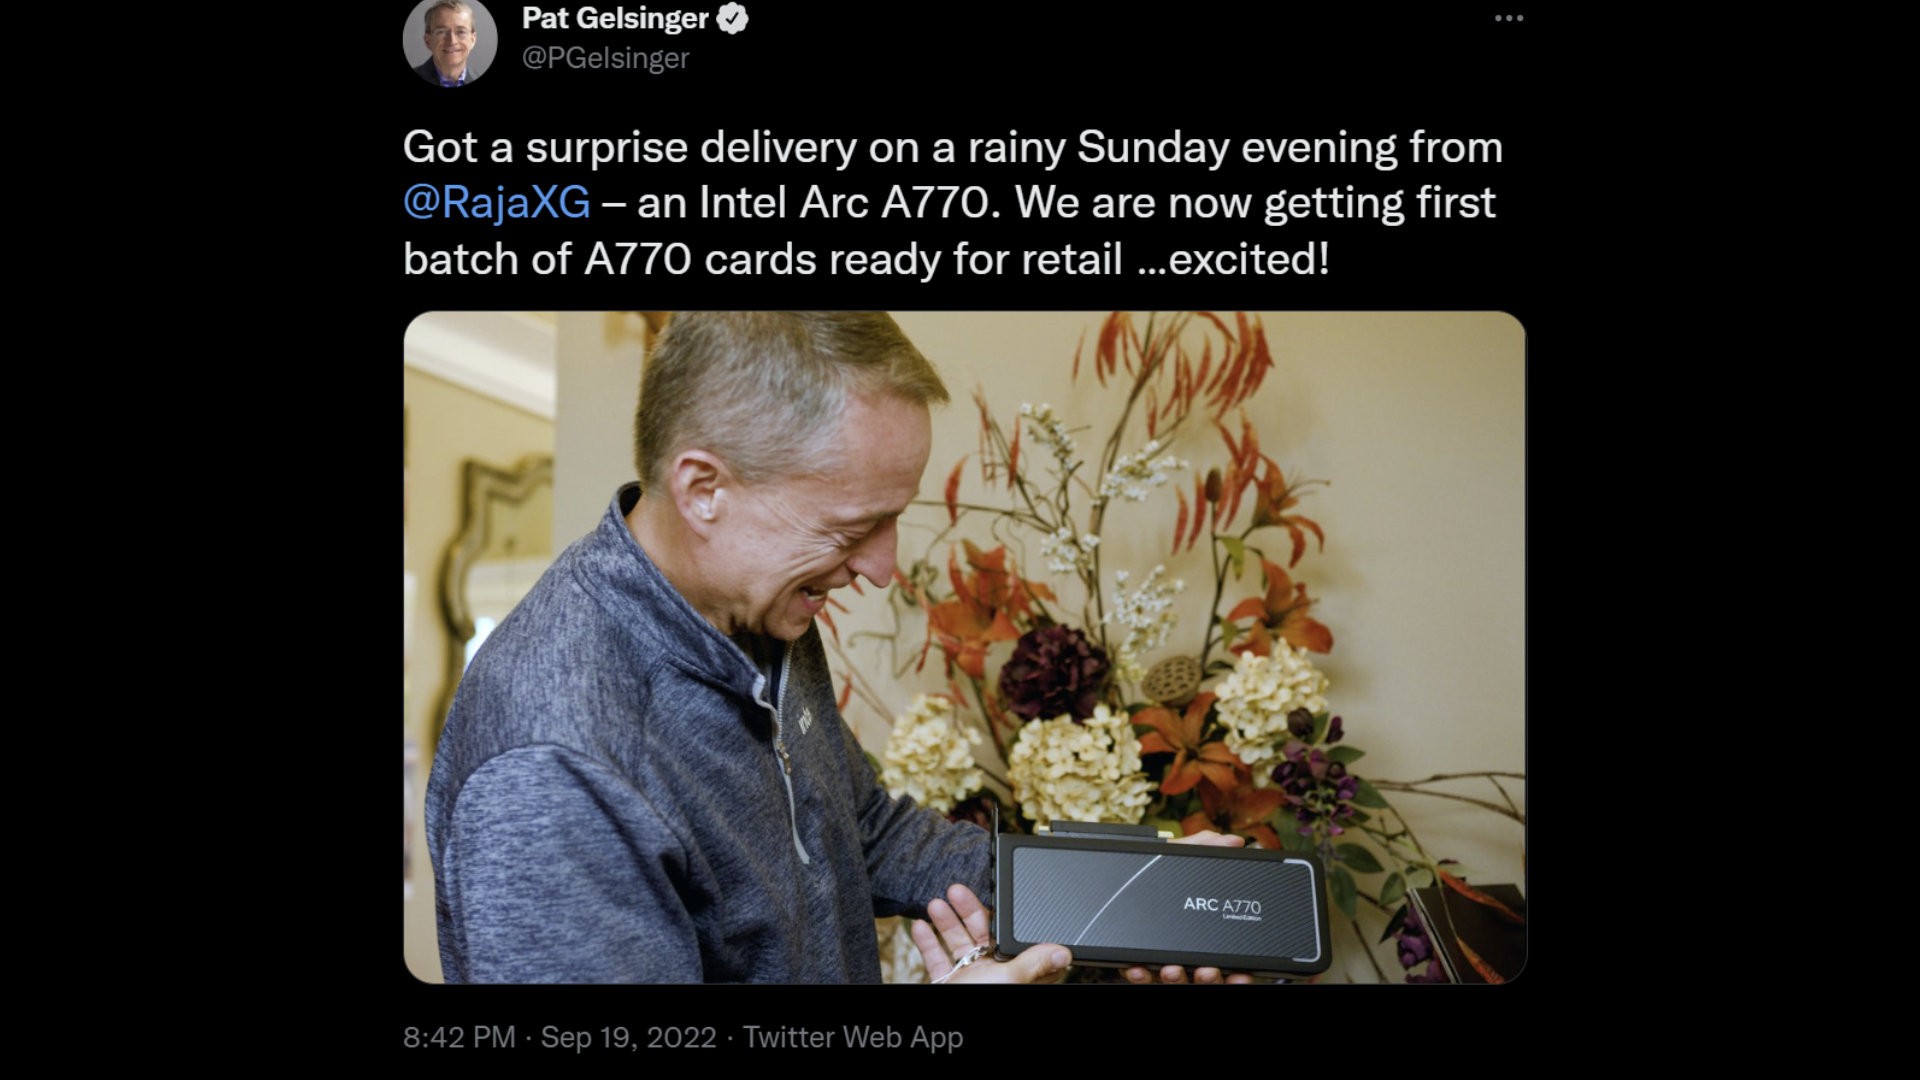 Pat Gelsinger holding Intel Arc GPU in Tweet that reads "Got a surprise delivery on a rainy Sunday evening from @RajaXG – an Intel Arc A770. We are now getting first batch of A770 cards ready for retail …excited!"